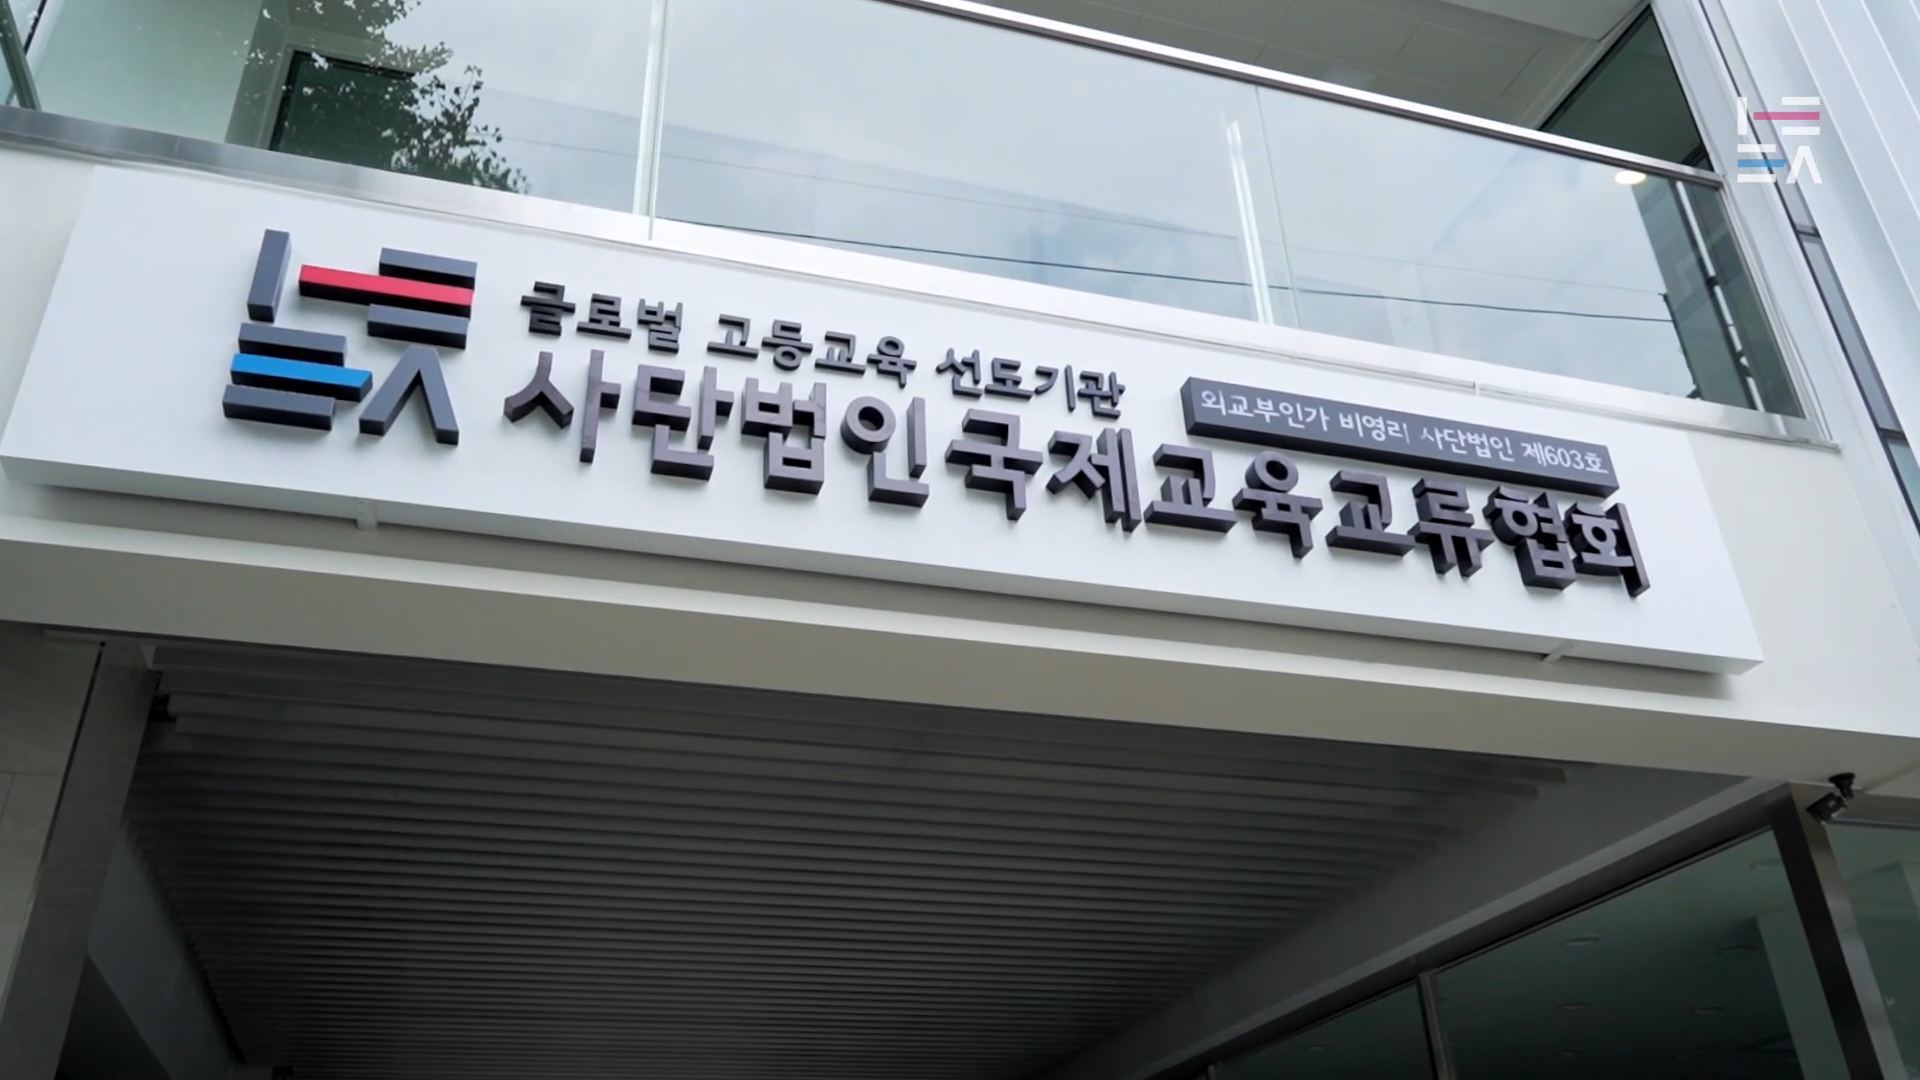 IEEA글로벌캠퍼스, Welcome to the new campus!